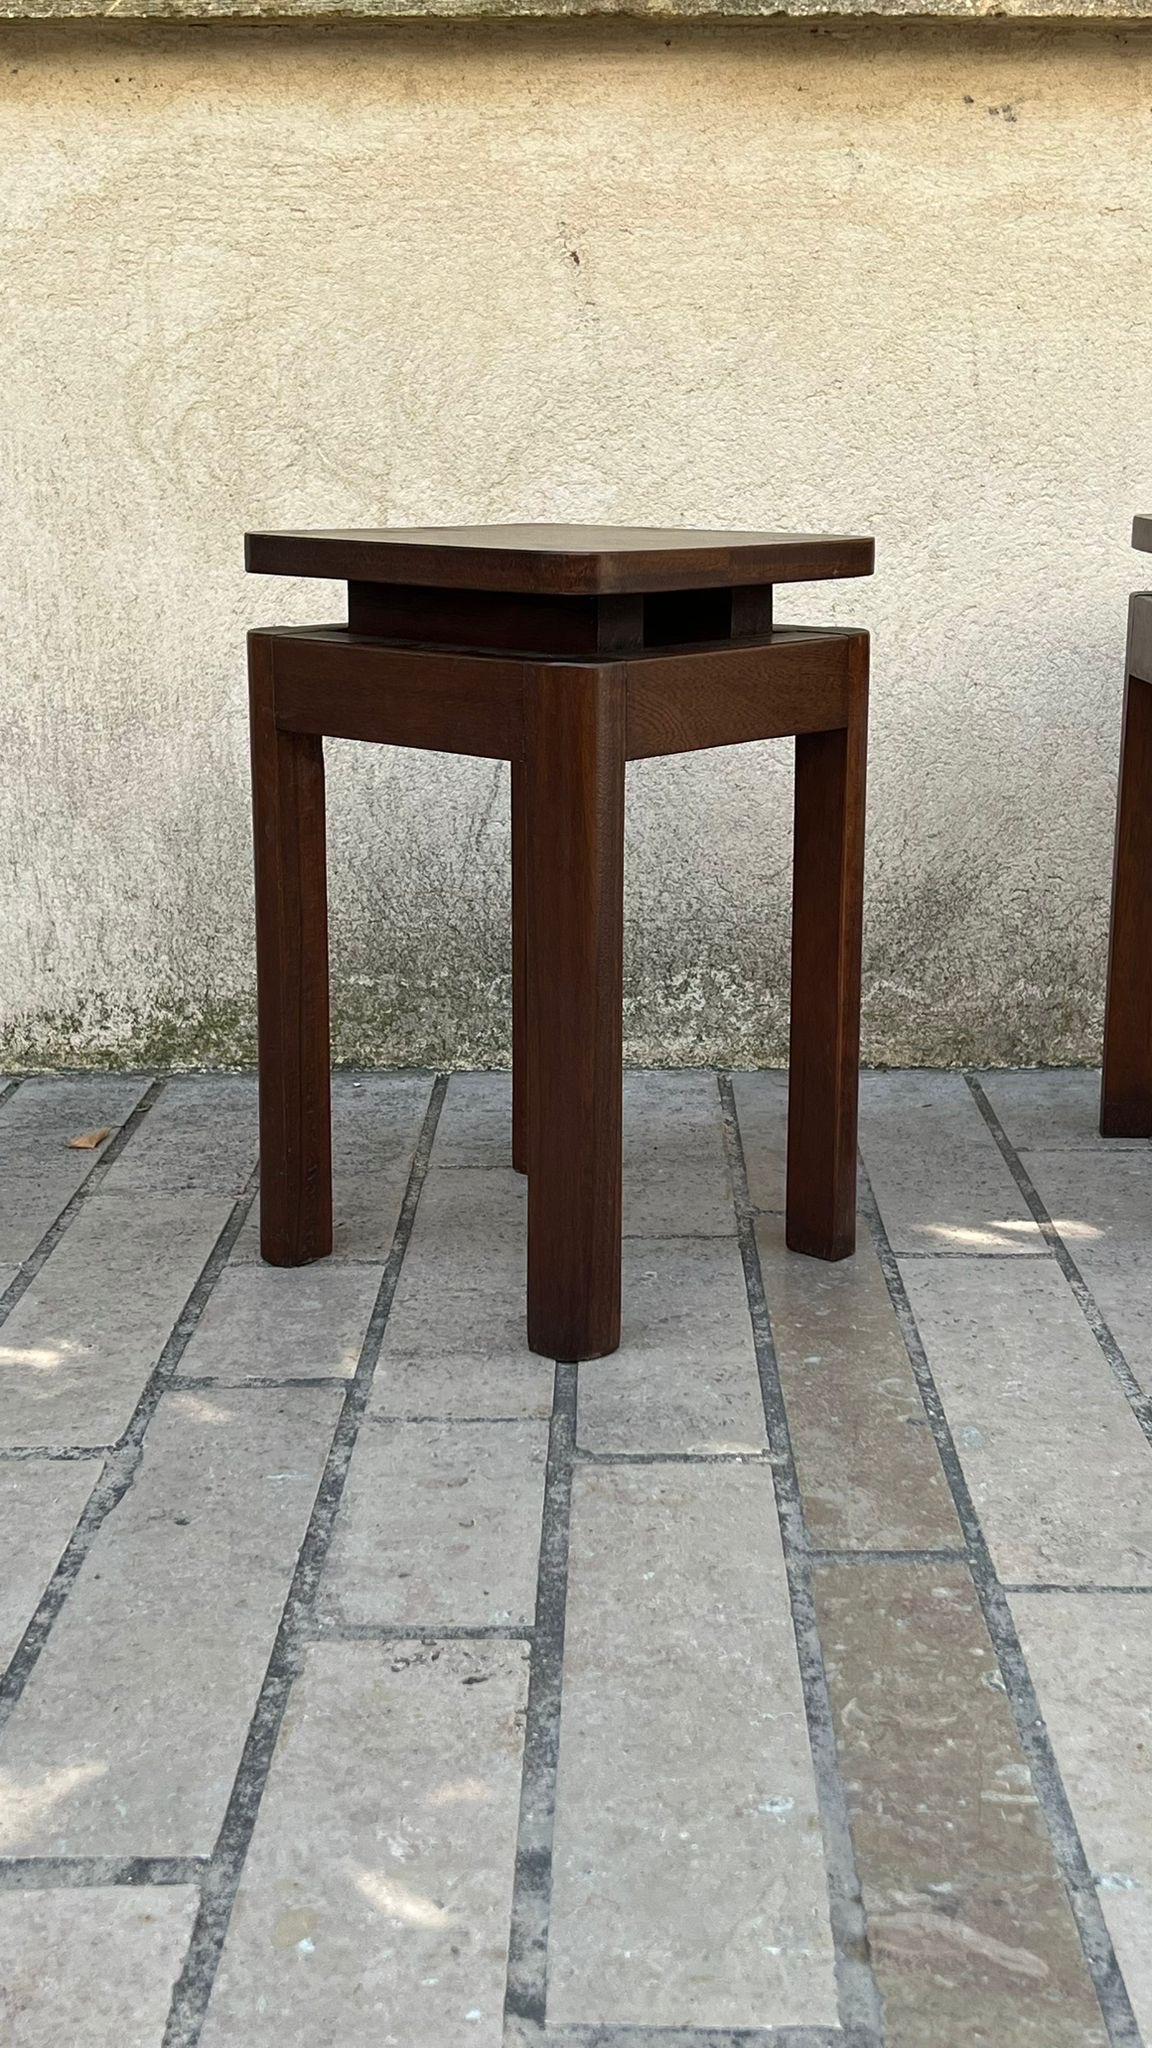 A pair of stools can also be end table.